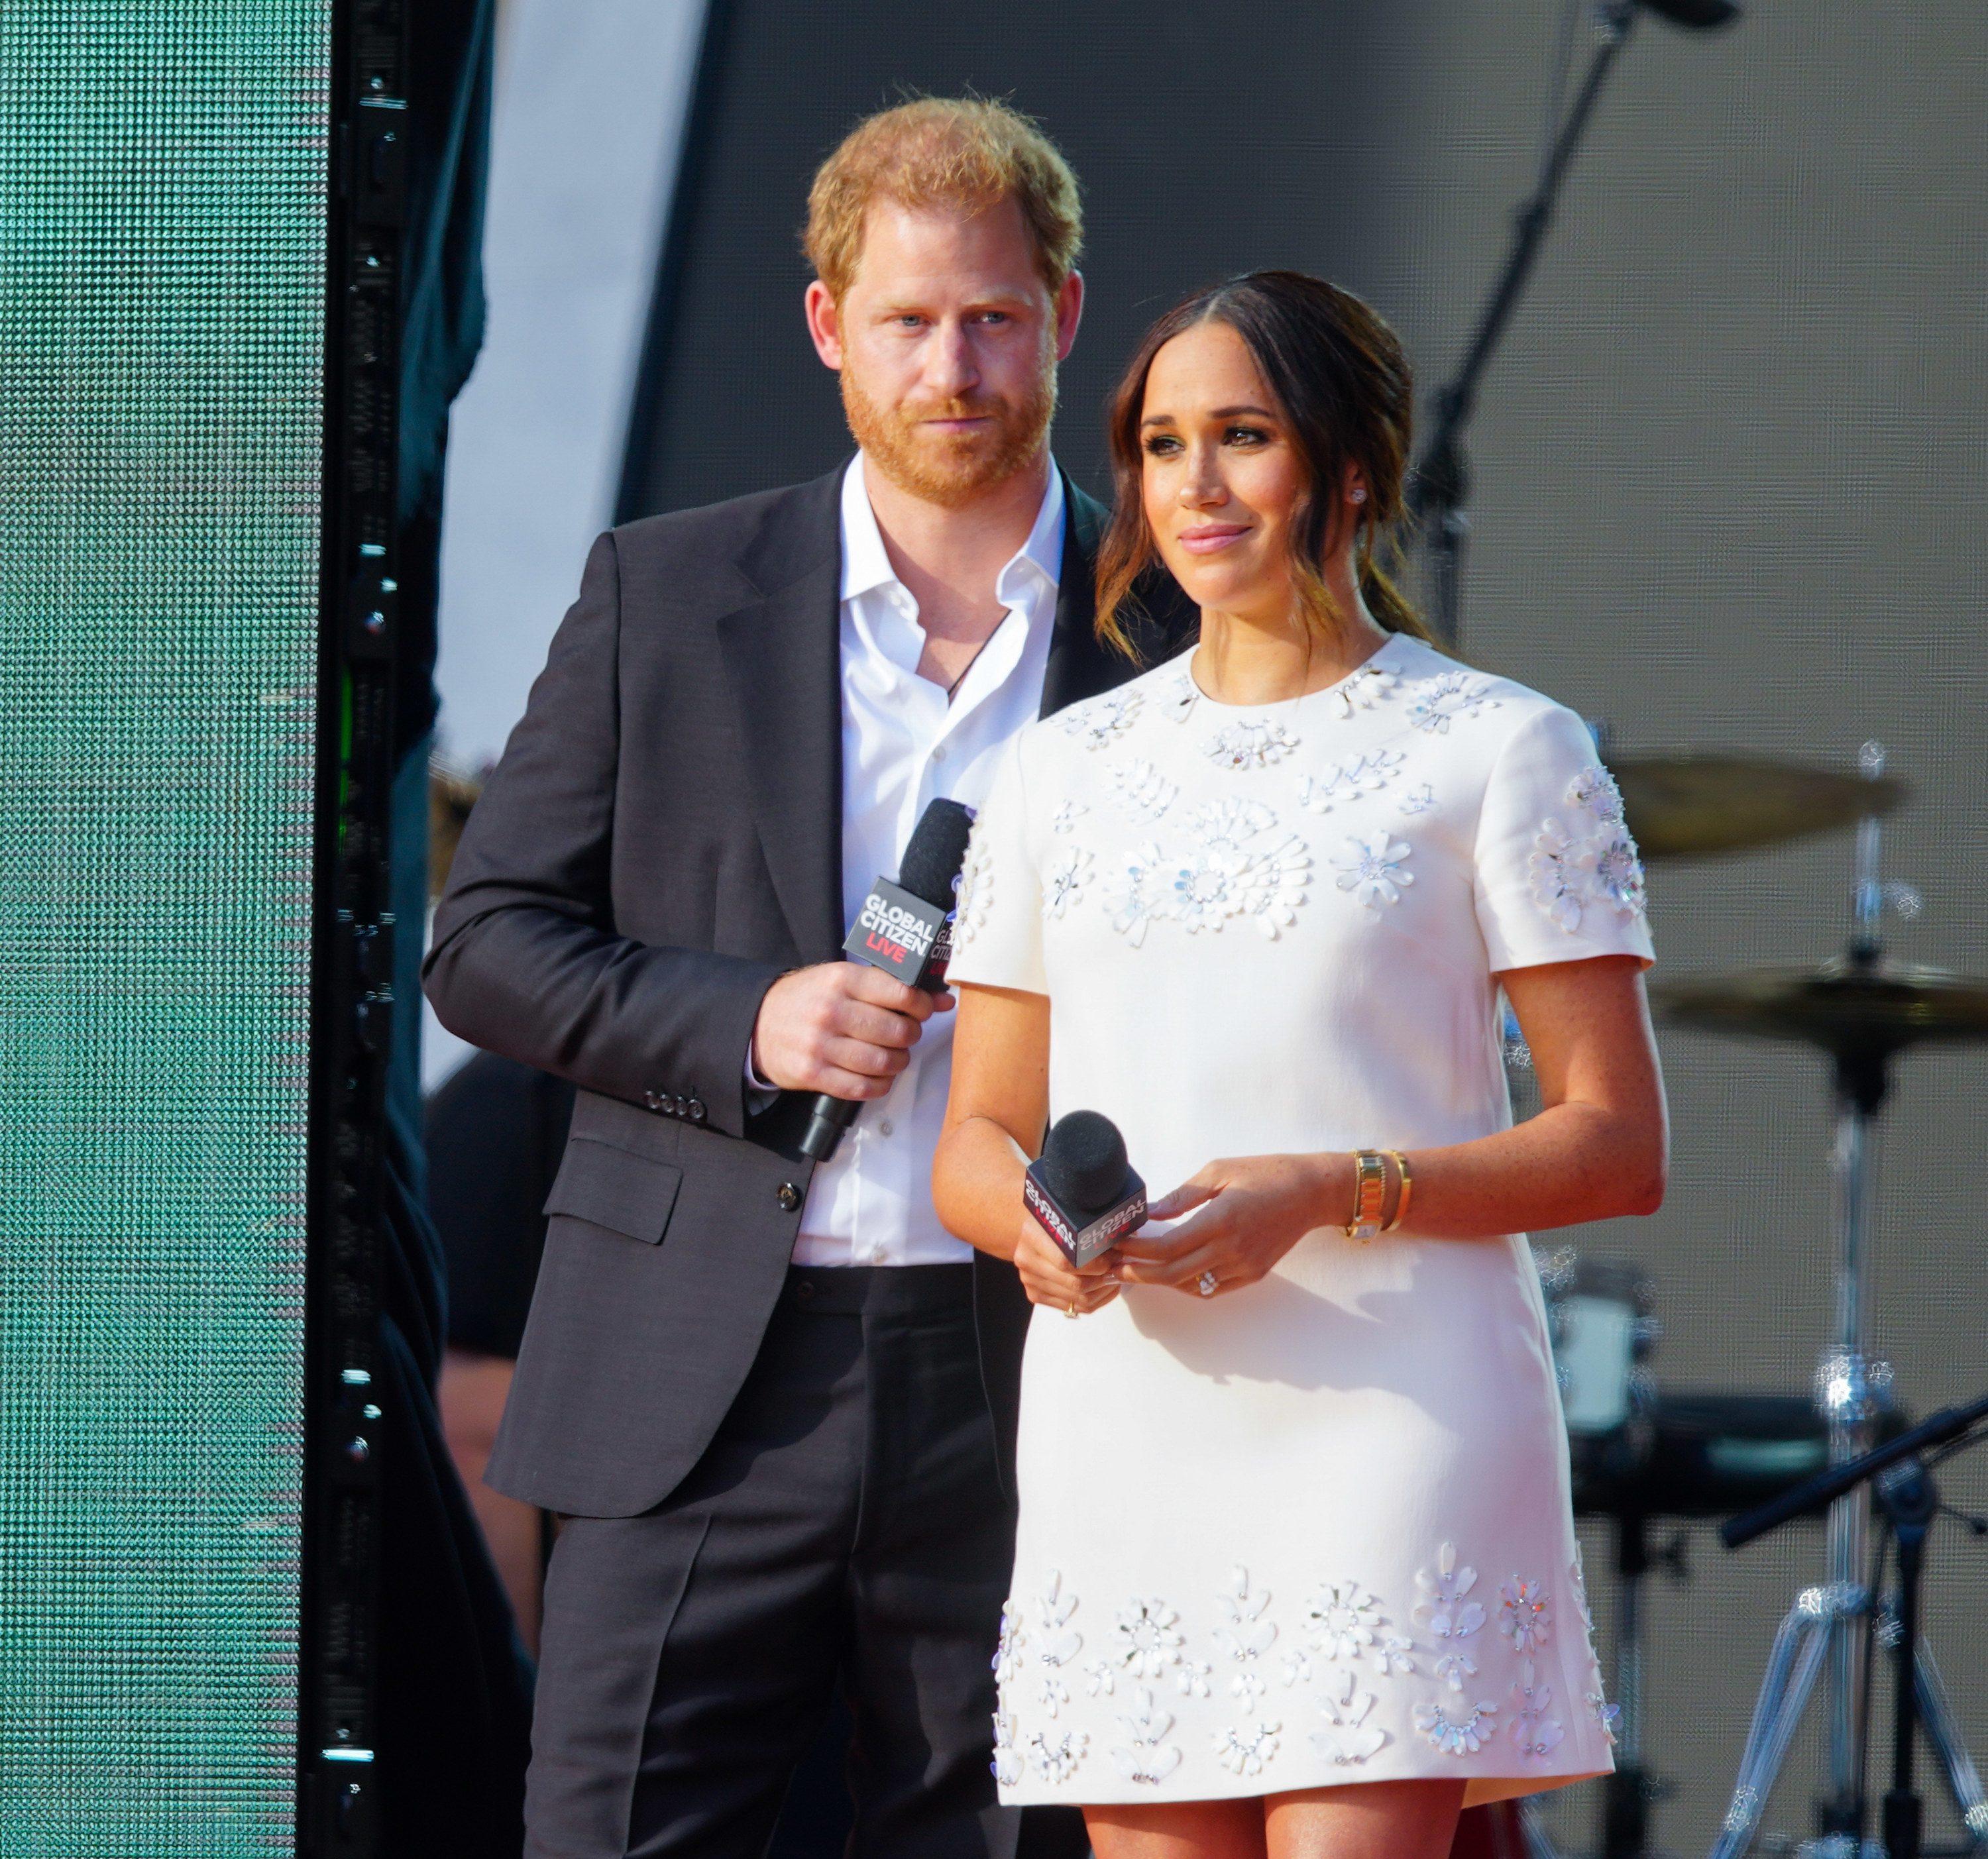 Harry and Markle step on stage together